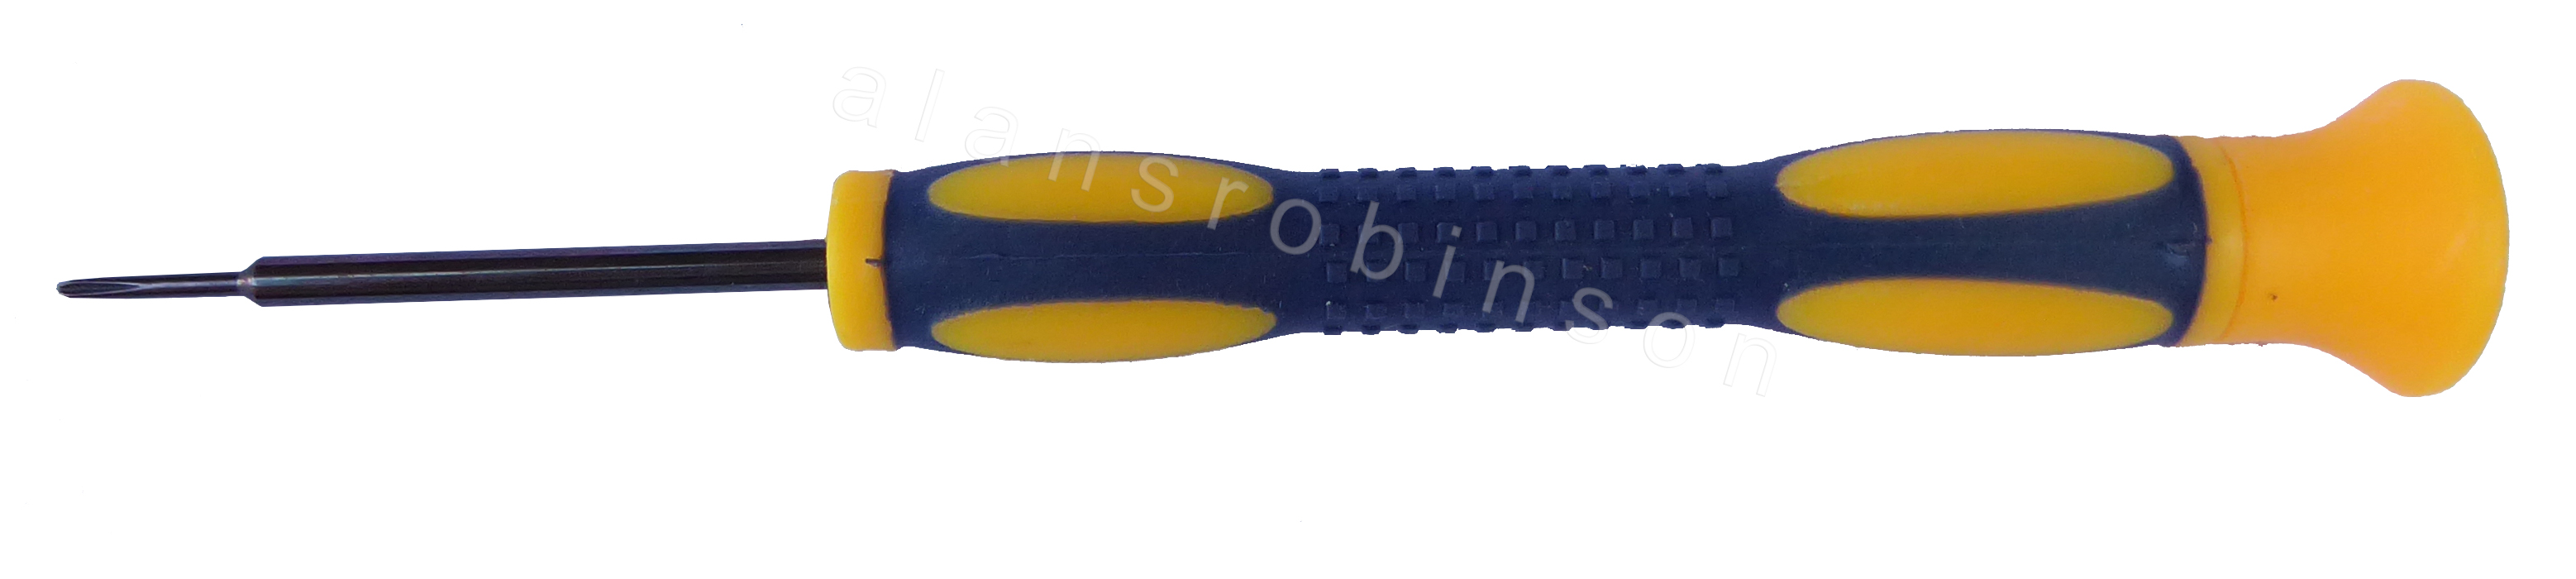 Blue and yellow screwdriver for 00 guage track fixing